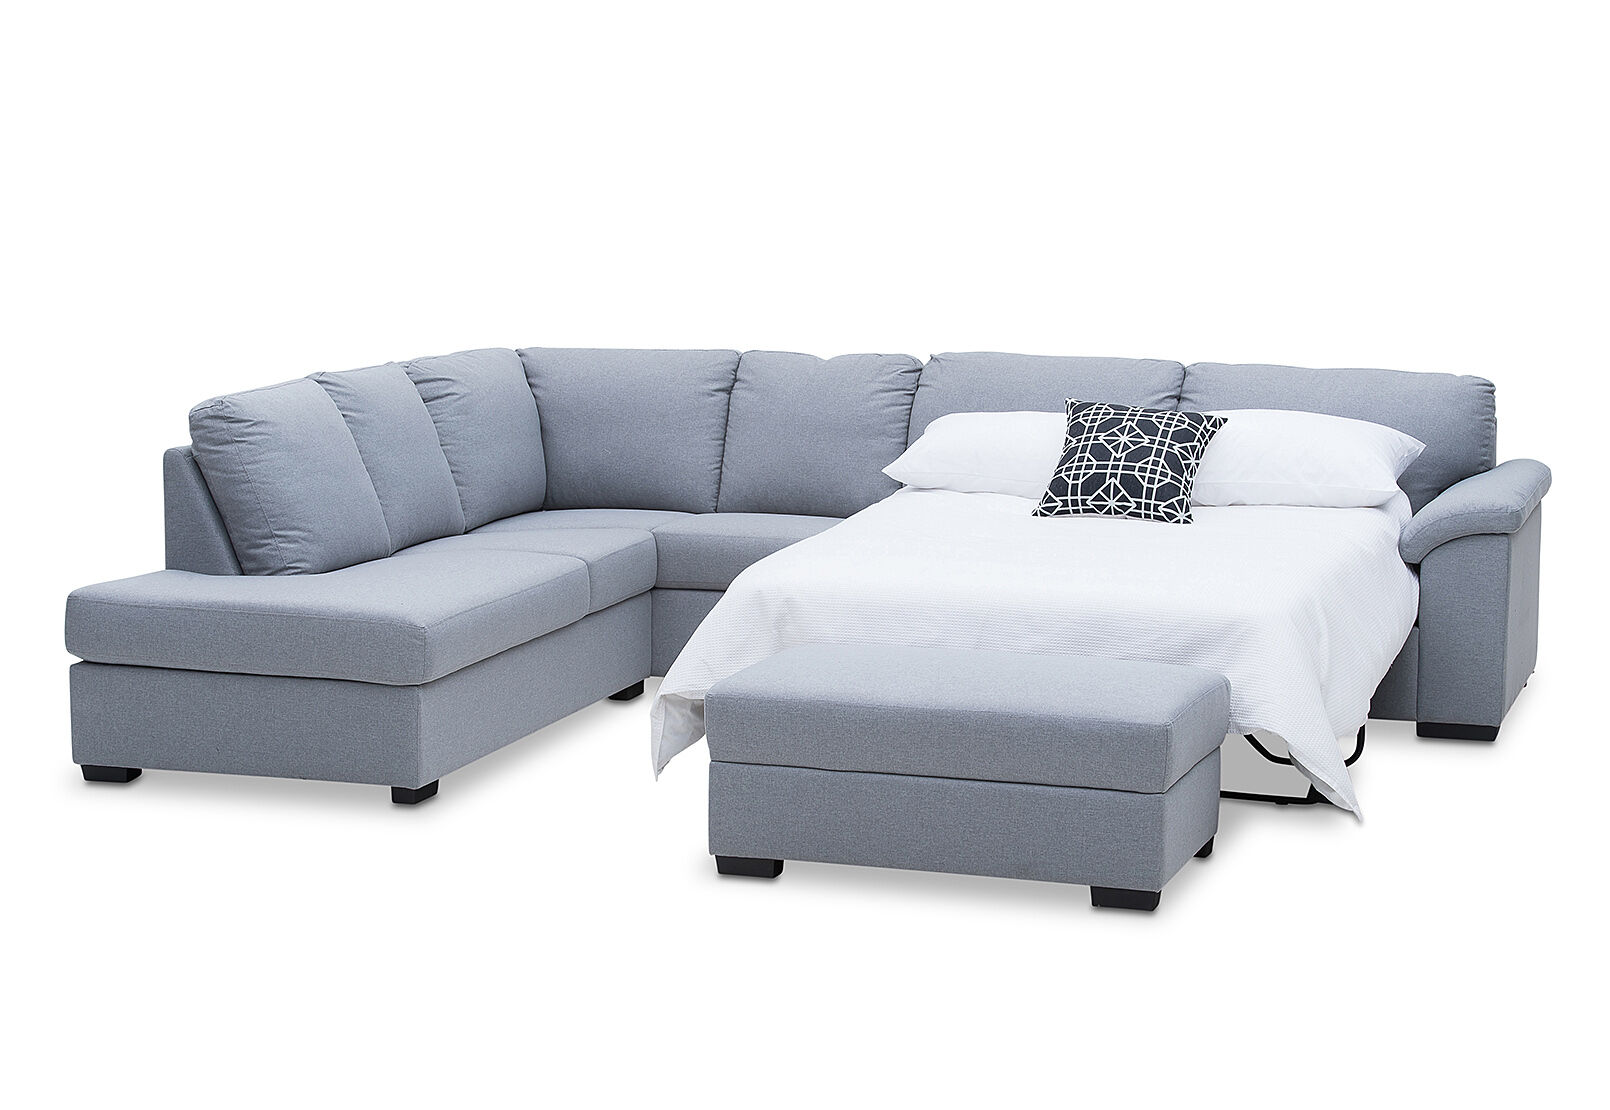 LIGHT GREY RUMPUS Fabric Corner Suite Left Hand Facing Chaise With Sofa Bed Amart Furniture